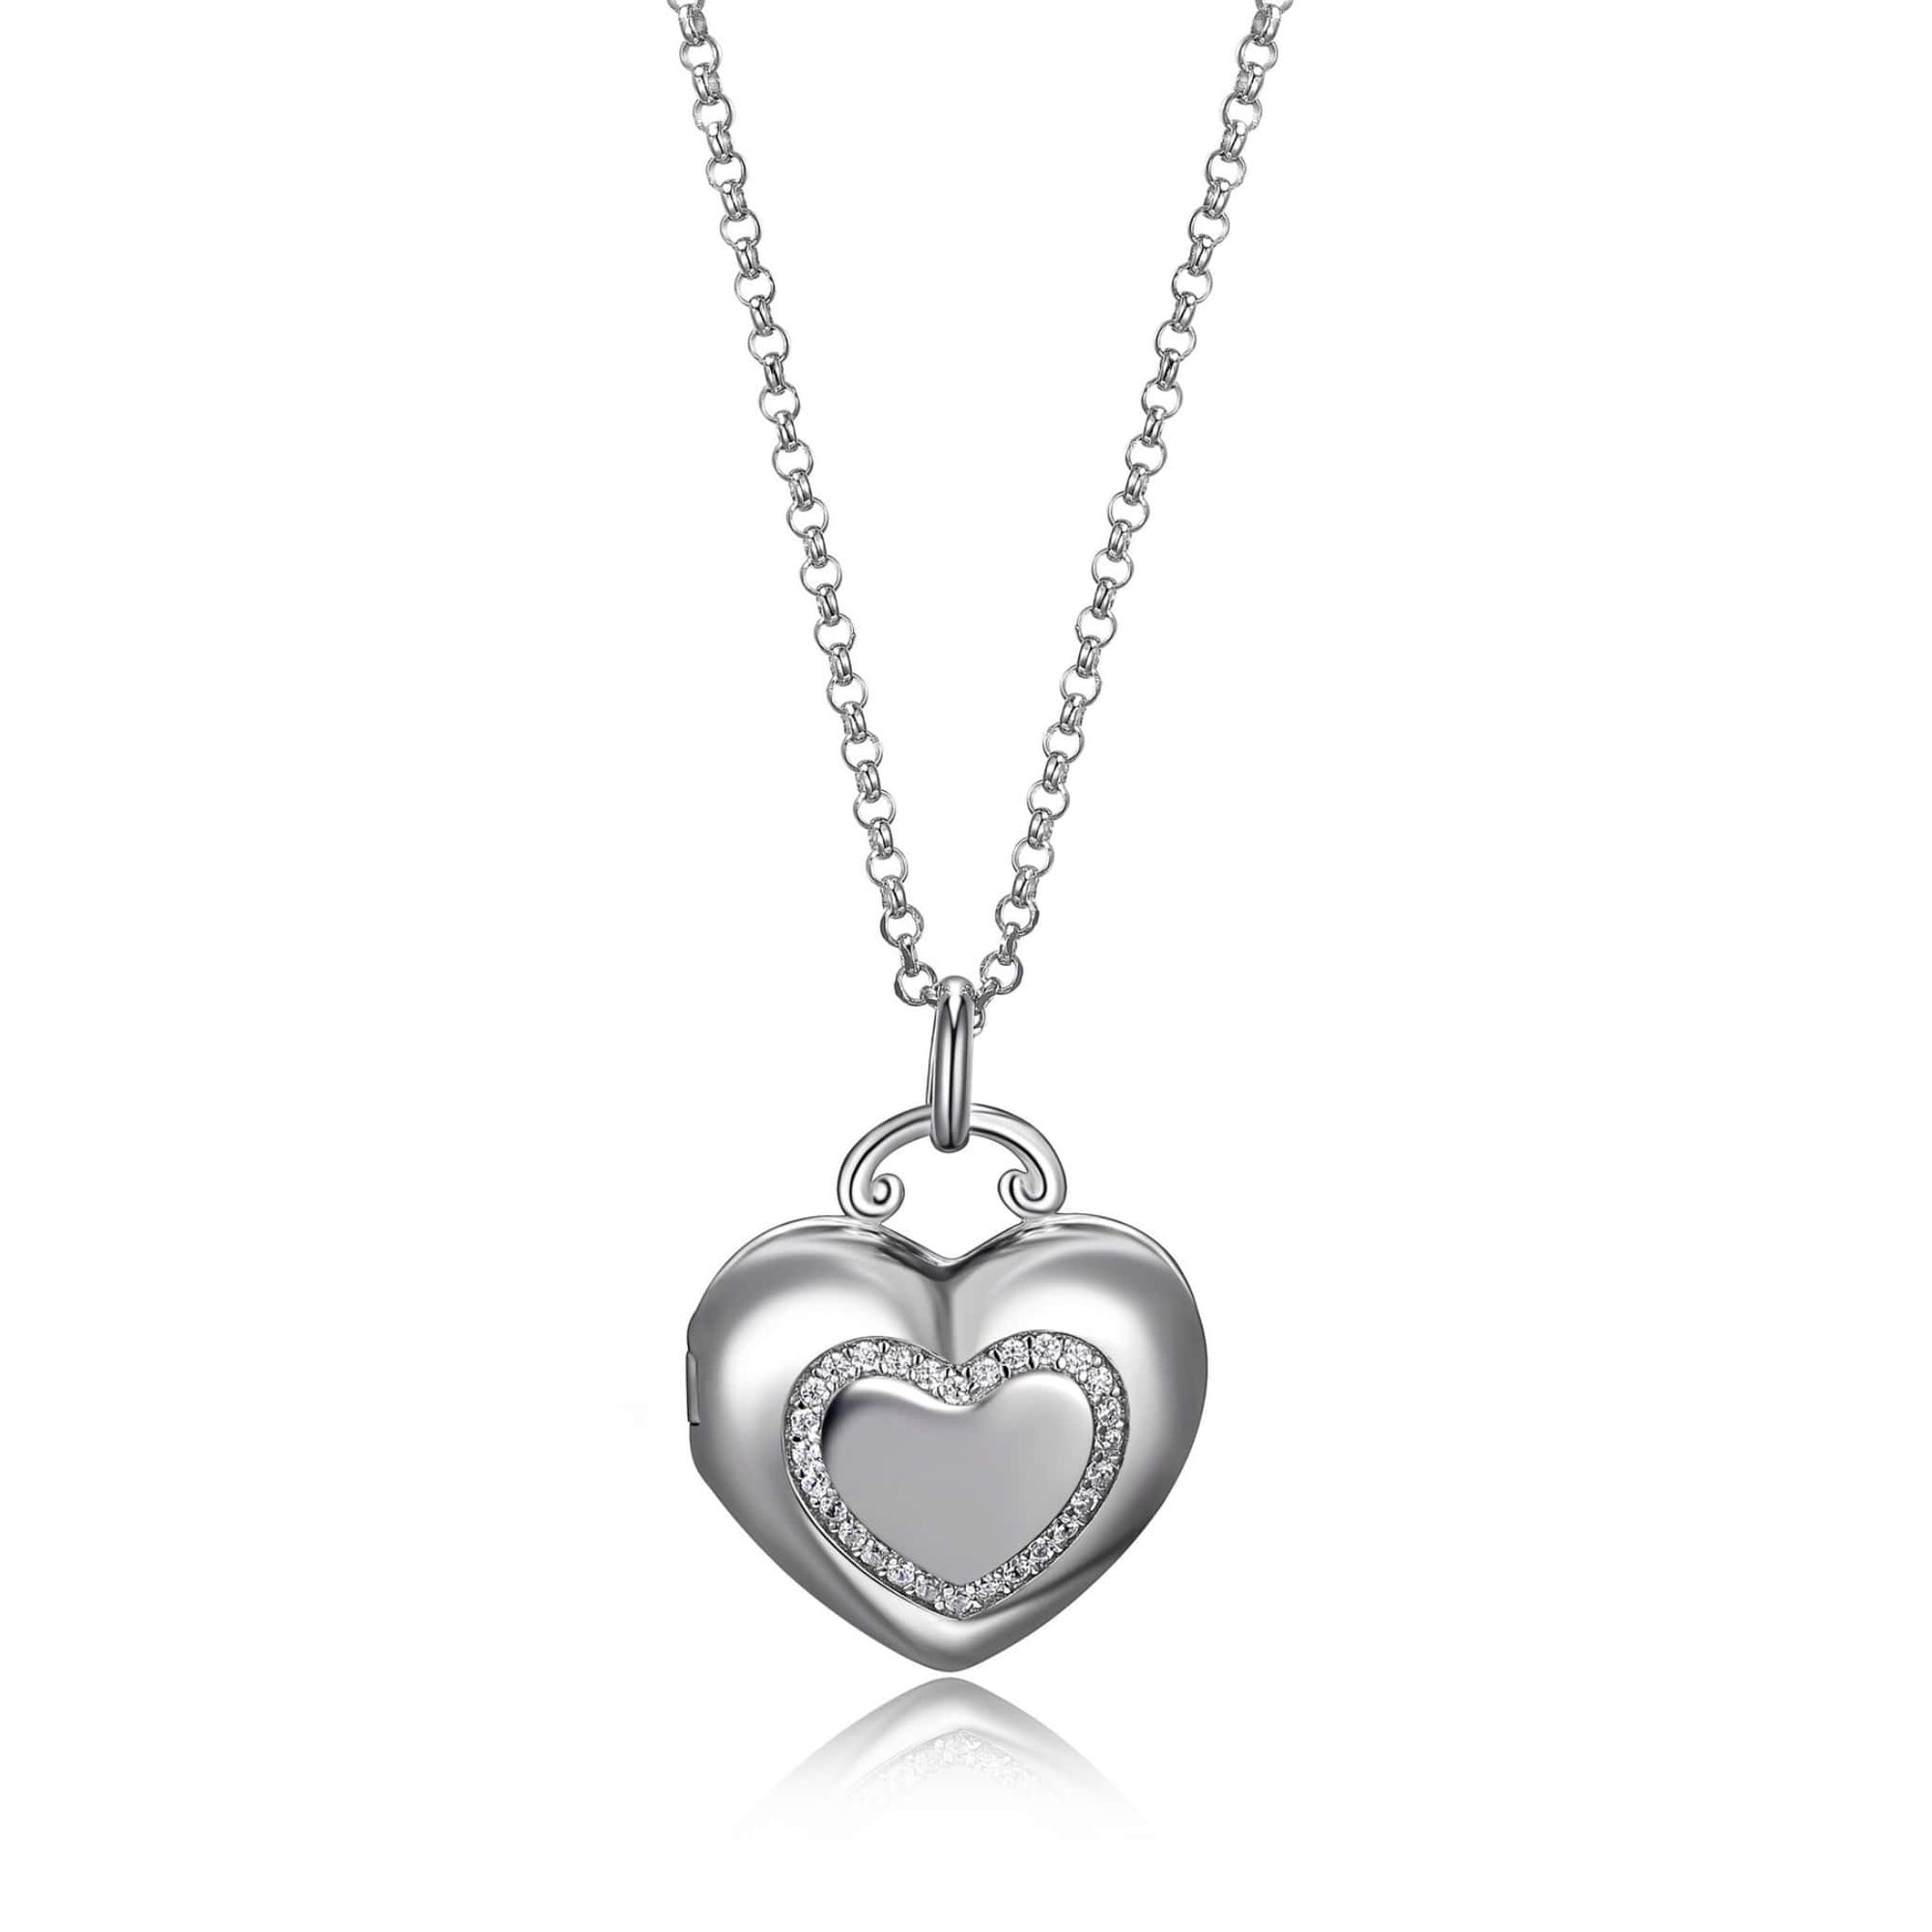 Silver CZ Heart Locket Necklace at Arman's Jewellers